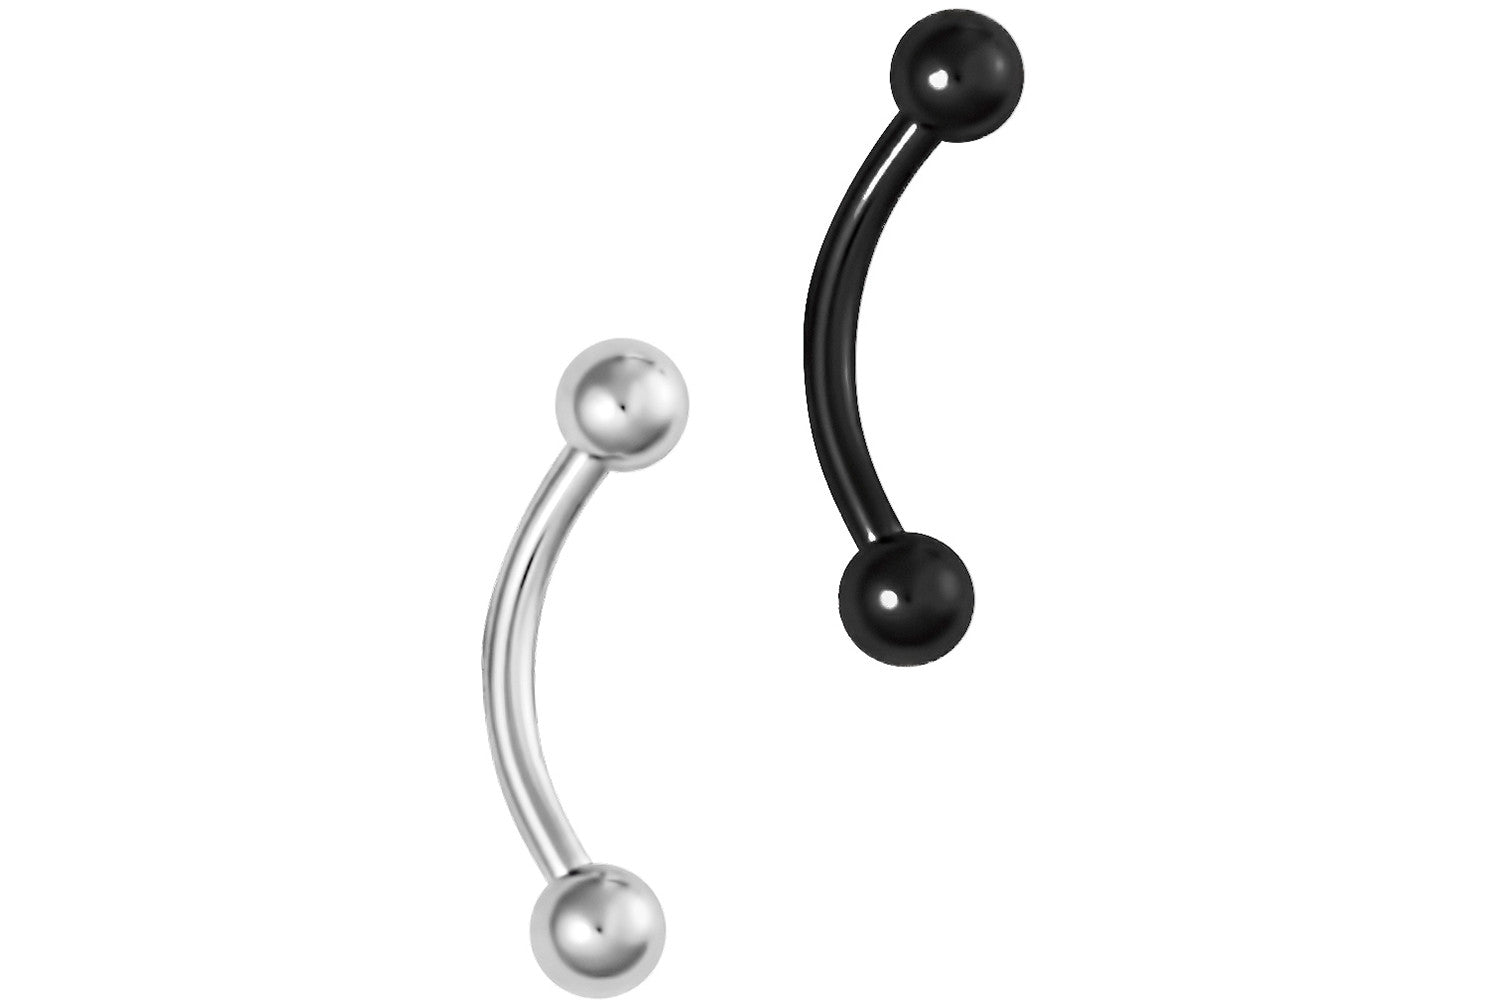 This set comes with two eyebrow piercing barbells. These 16 gauge curved eyebrow barbells are made with surgical grade 316L stainless steel. The black barbell is Titanium IP plated for color. IP plating (Ion Plating) is a safe and permanent surface refinishing process used to add color to body jewelry. These eyebrow rings are both hypoallergenic and nickel free.